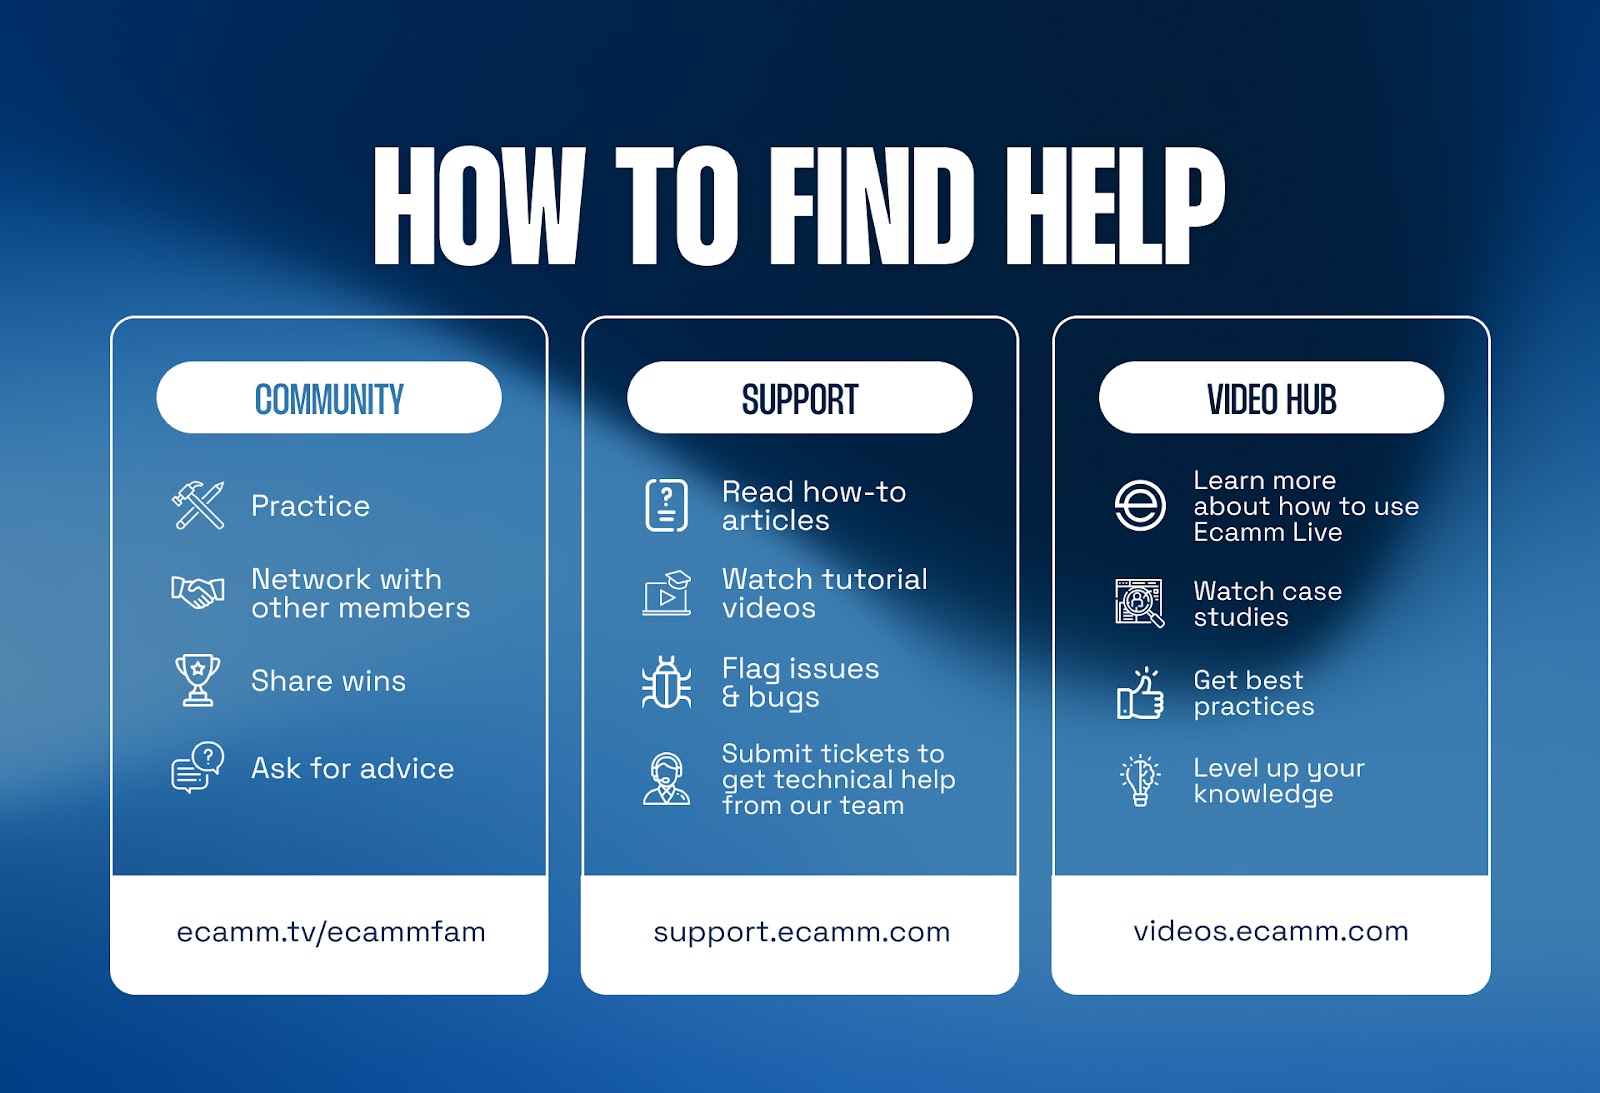 Ecamm Live - How to Find Help